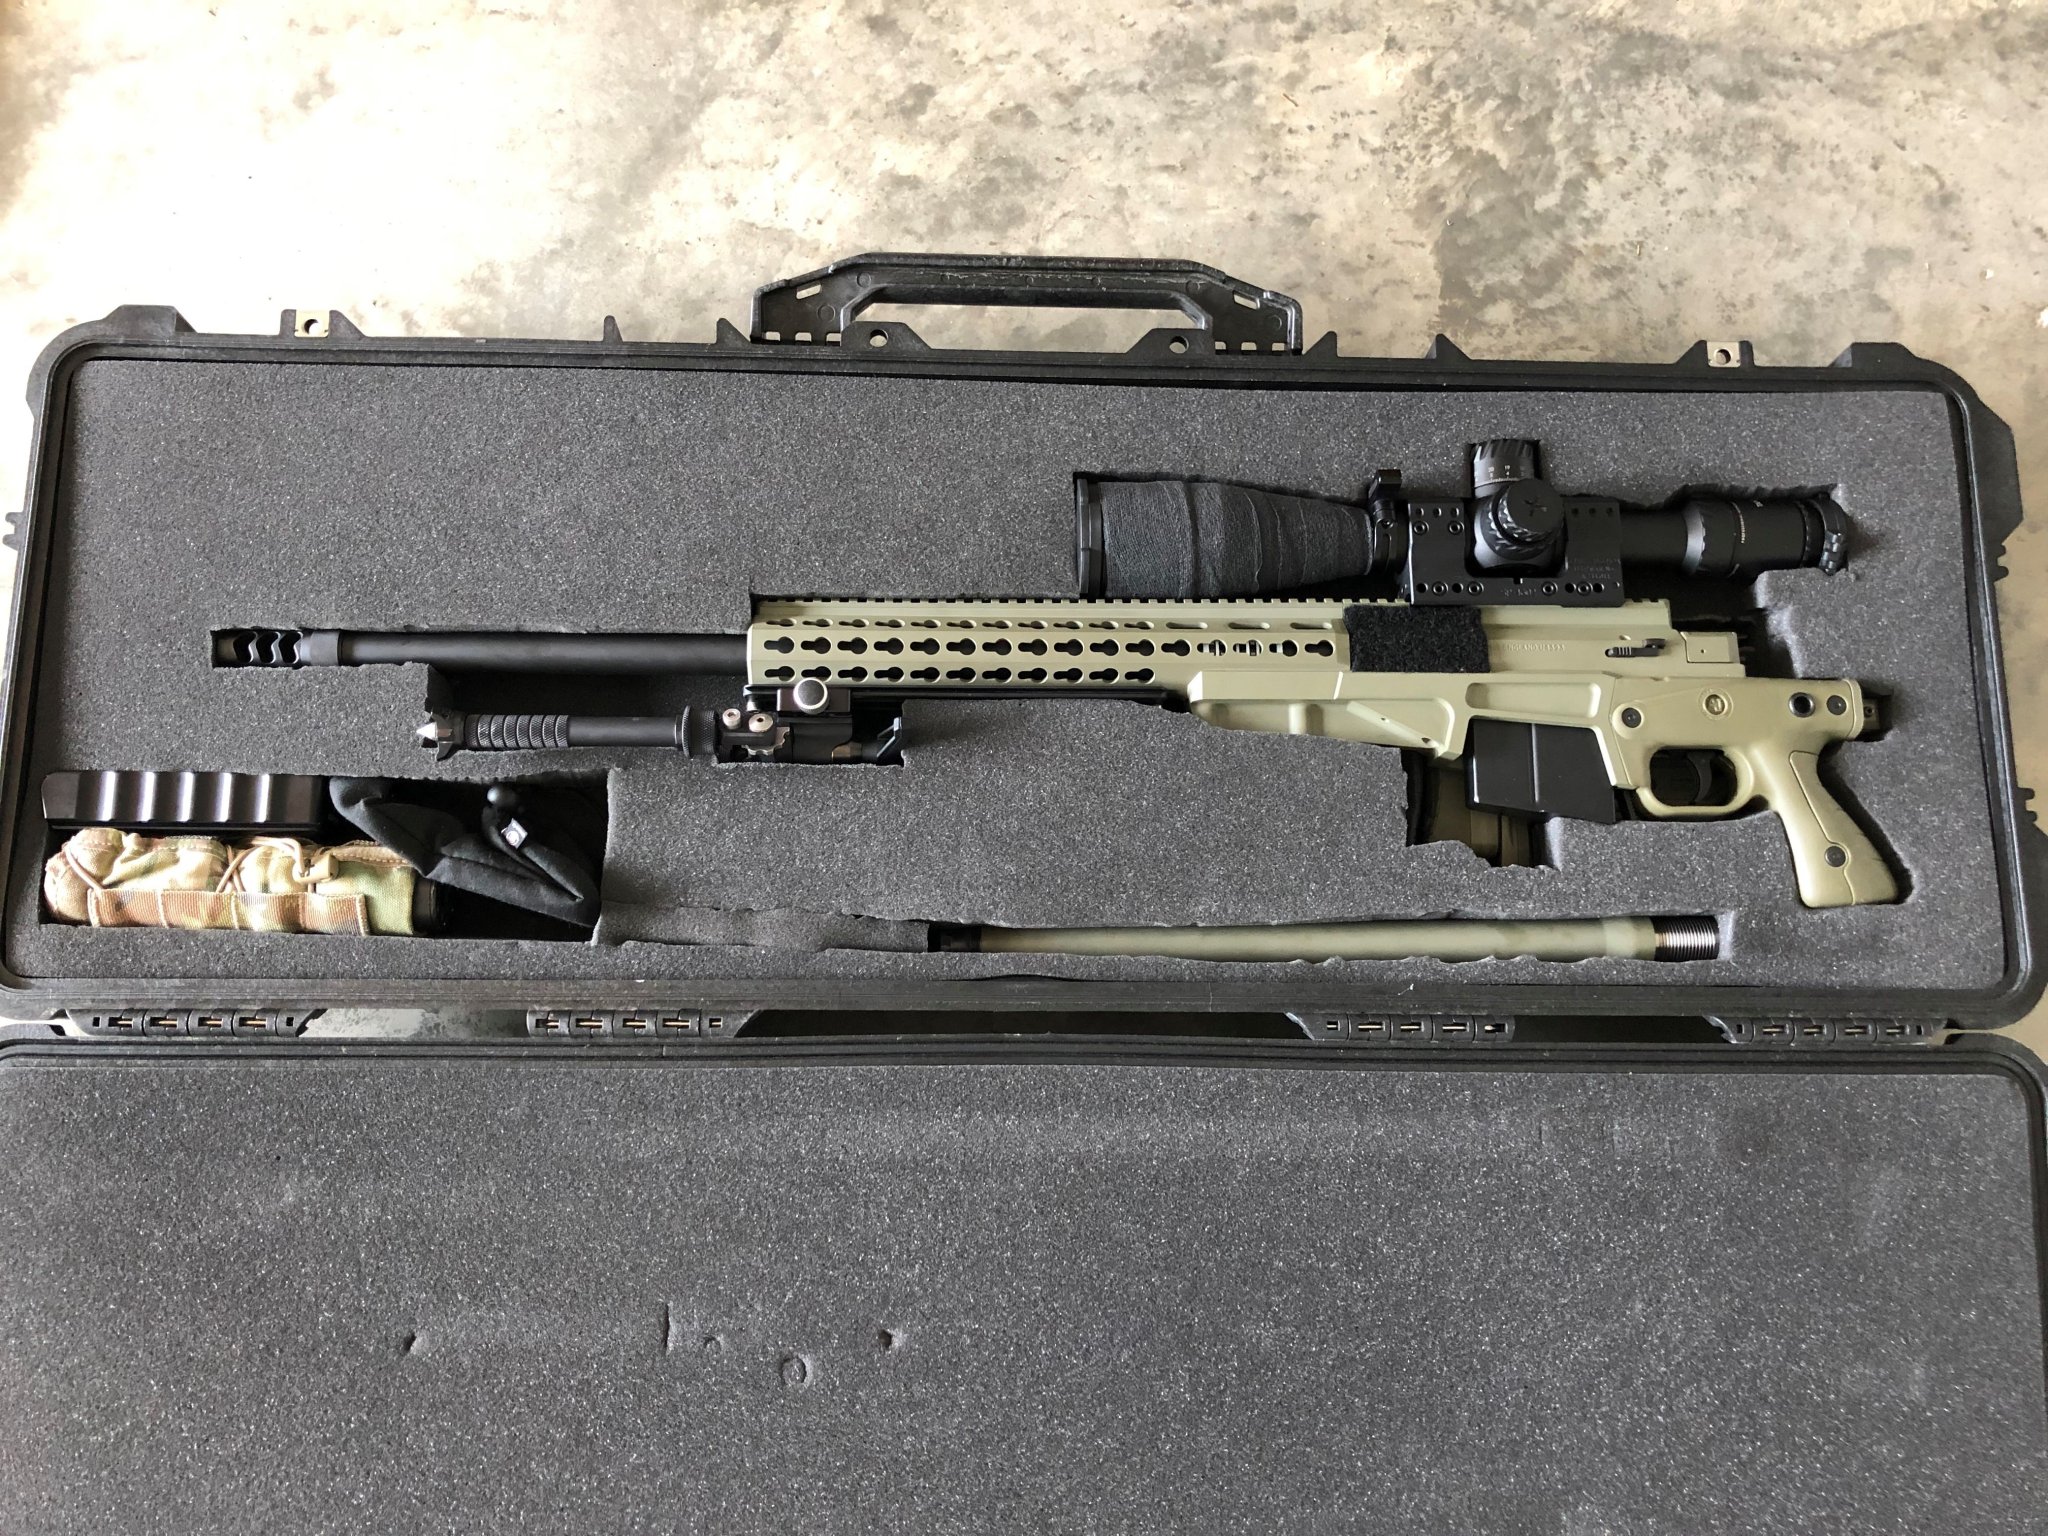 Accuracy International Picture Thread | Page 71 | Sniper's Hide Forum